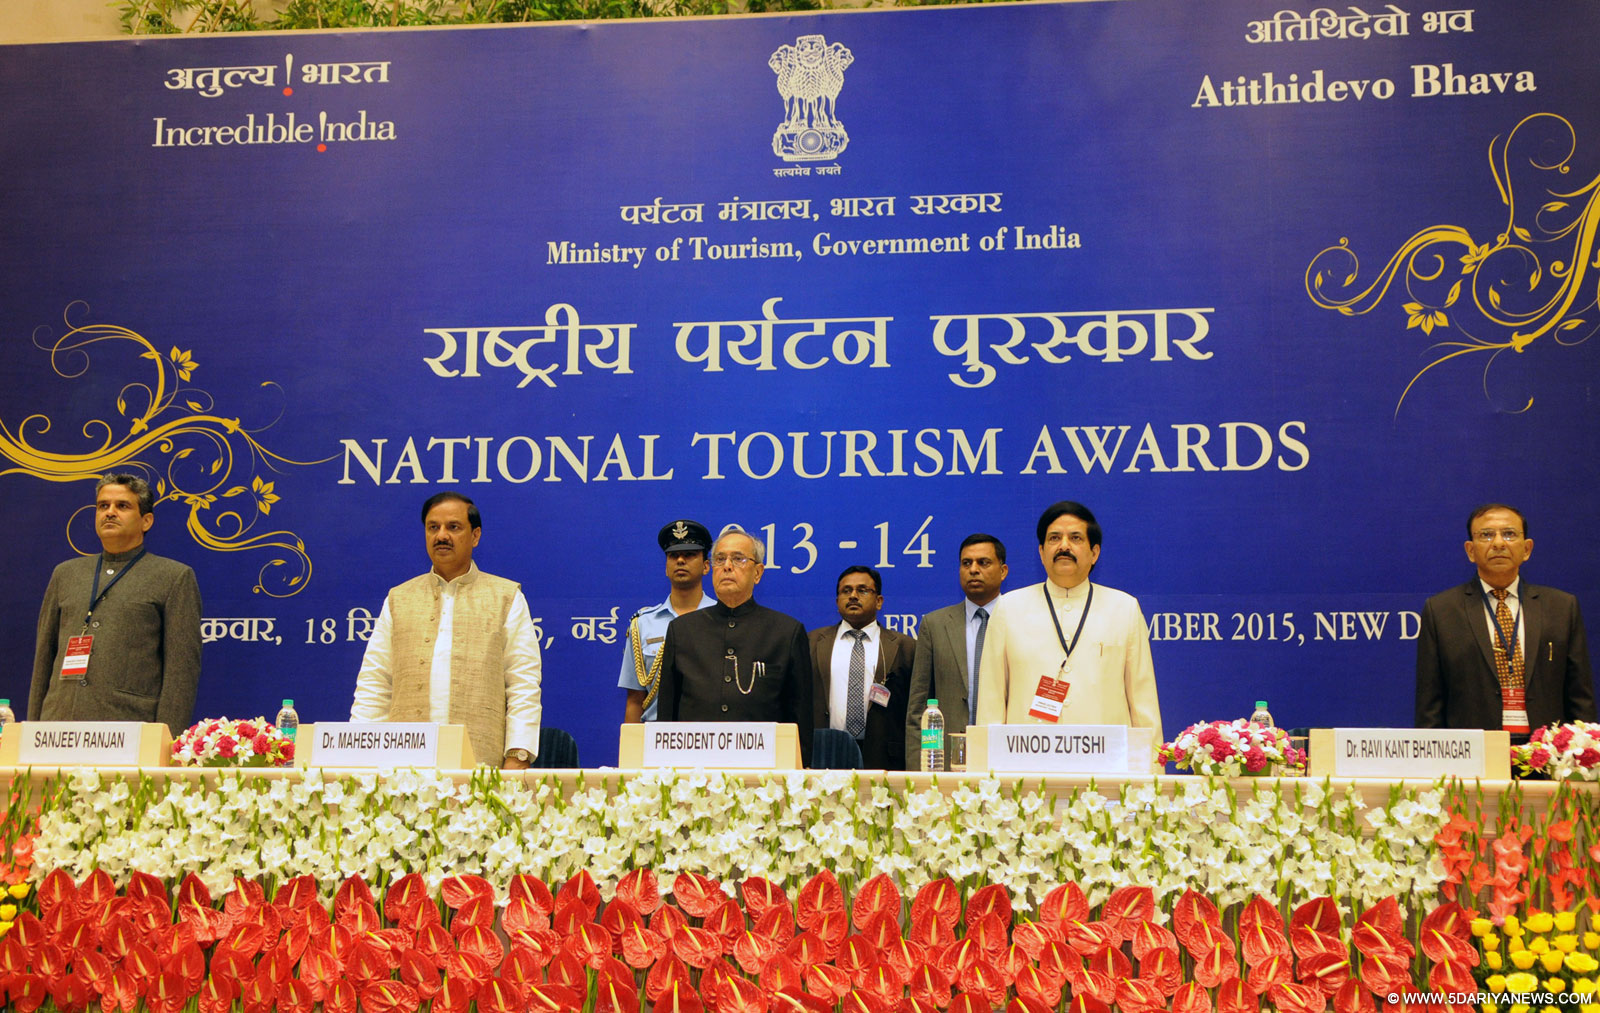 The President, Shri Pranab Mukherjee at the presentation of the National Tourism Awards 2013-14, in New Delhi on September 18, 2015. The Minister of State for Culture (Independent Charge), Tourism (Independent Charge) and Civil Aviation, Dr. Mahesh Sharma, the Secretary of Tourism, Shri Vinod Zutshi and other dignitaries are also seen.